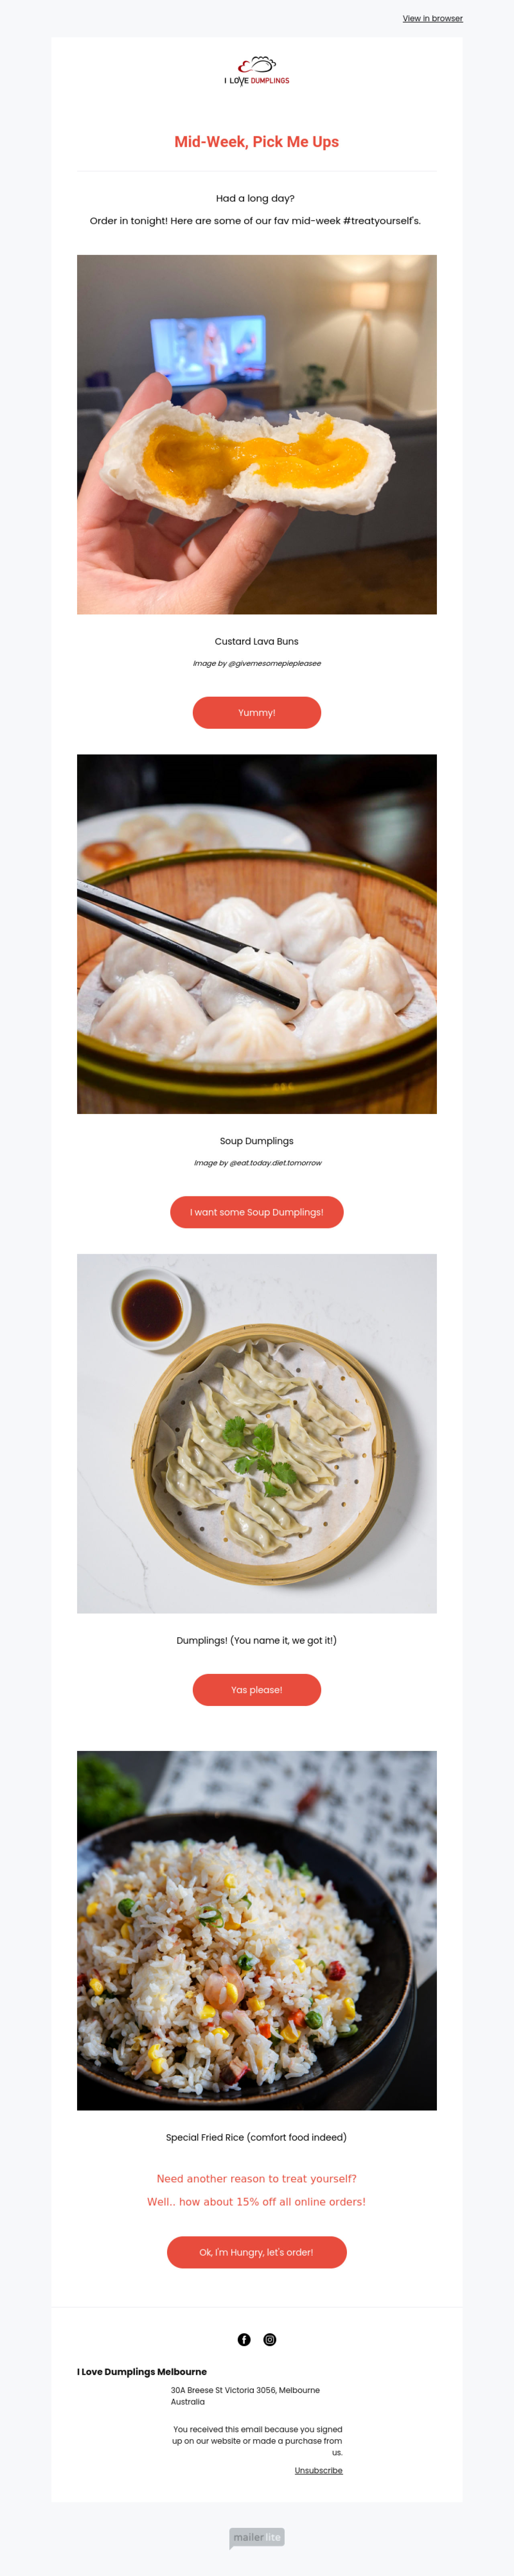 I Love Dumplings Melbourne example - Made with MailerLite